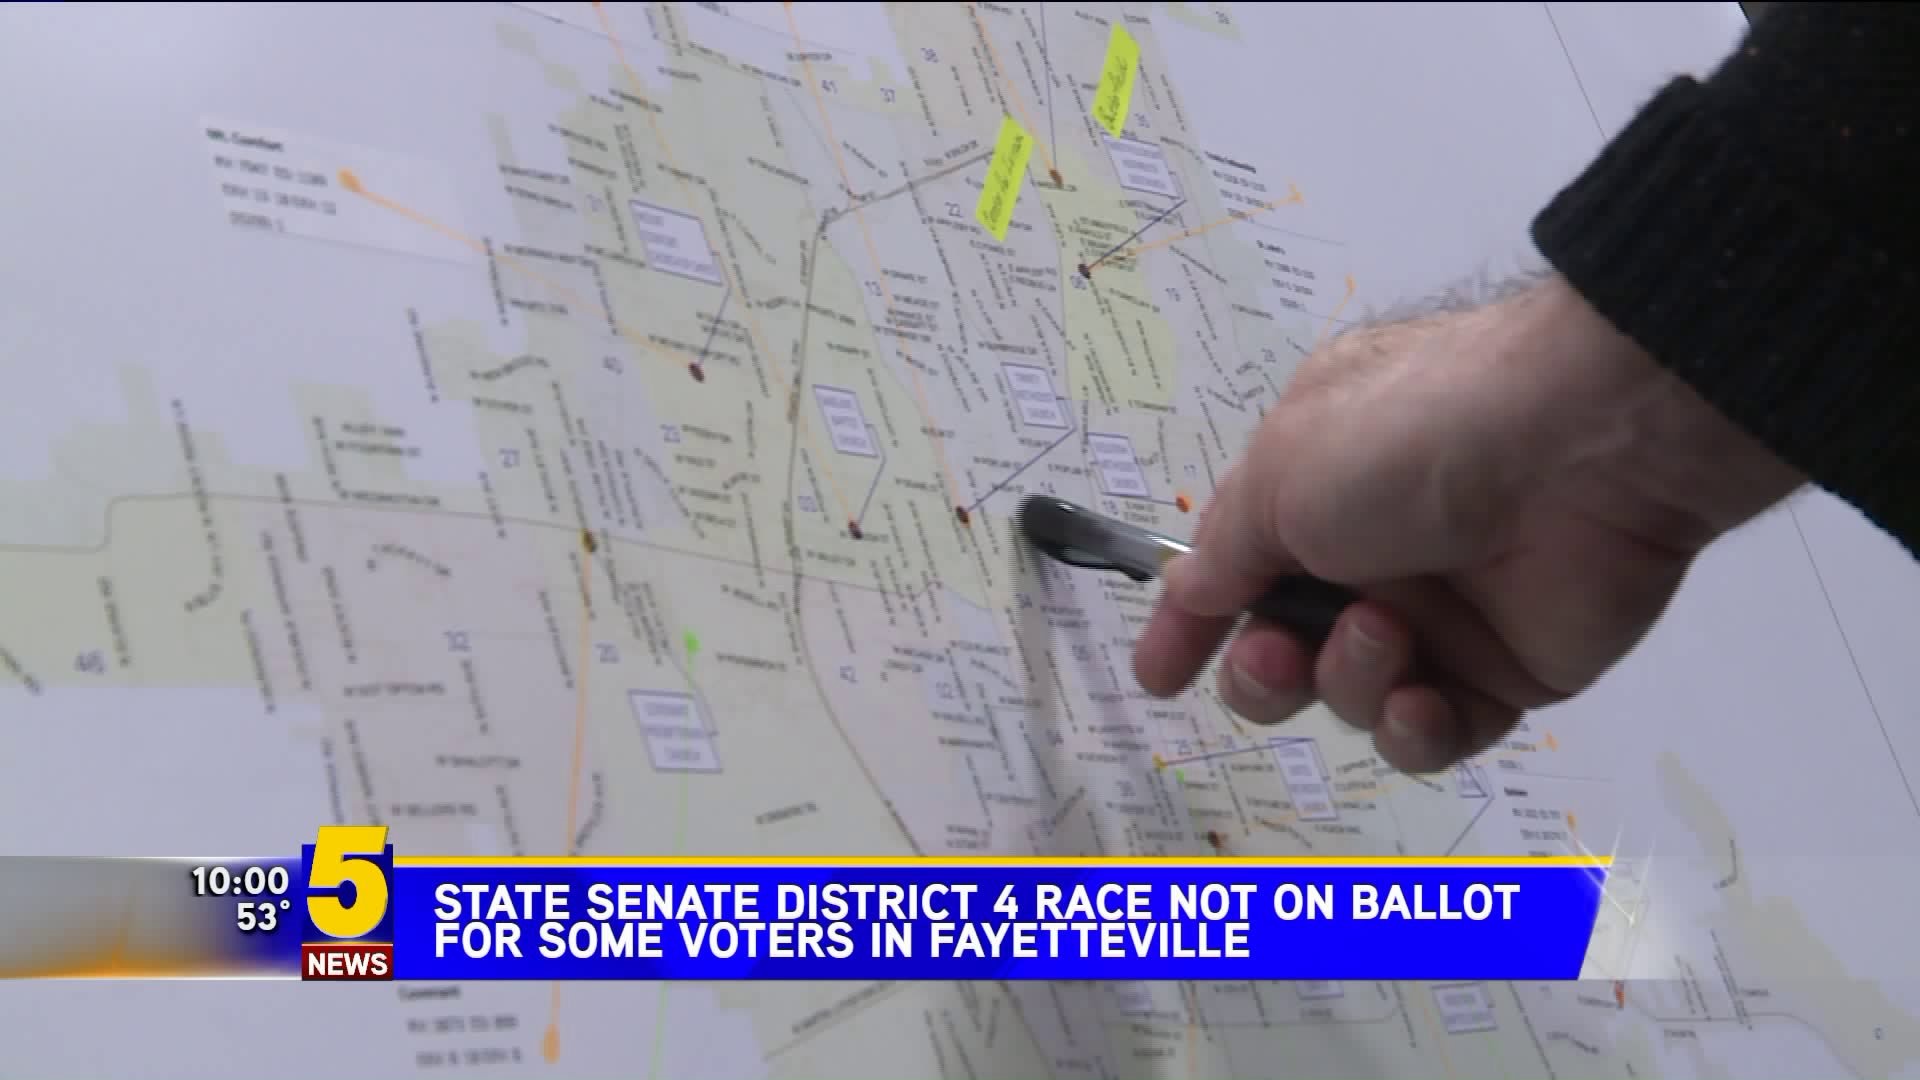 State Senate District 4 Race Not On Ballot For Some Voters In Fayetteville